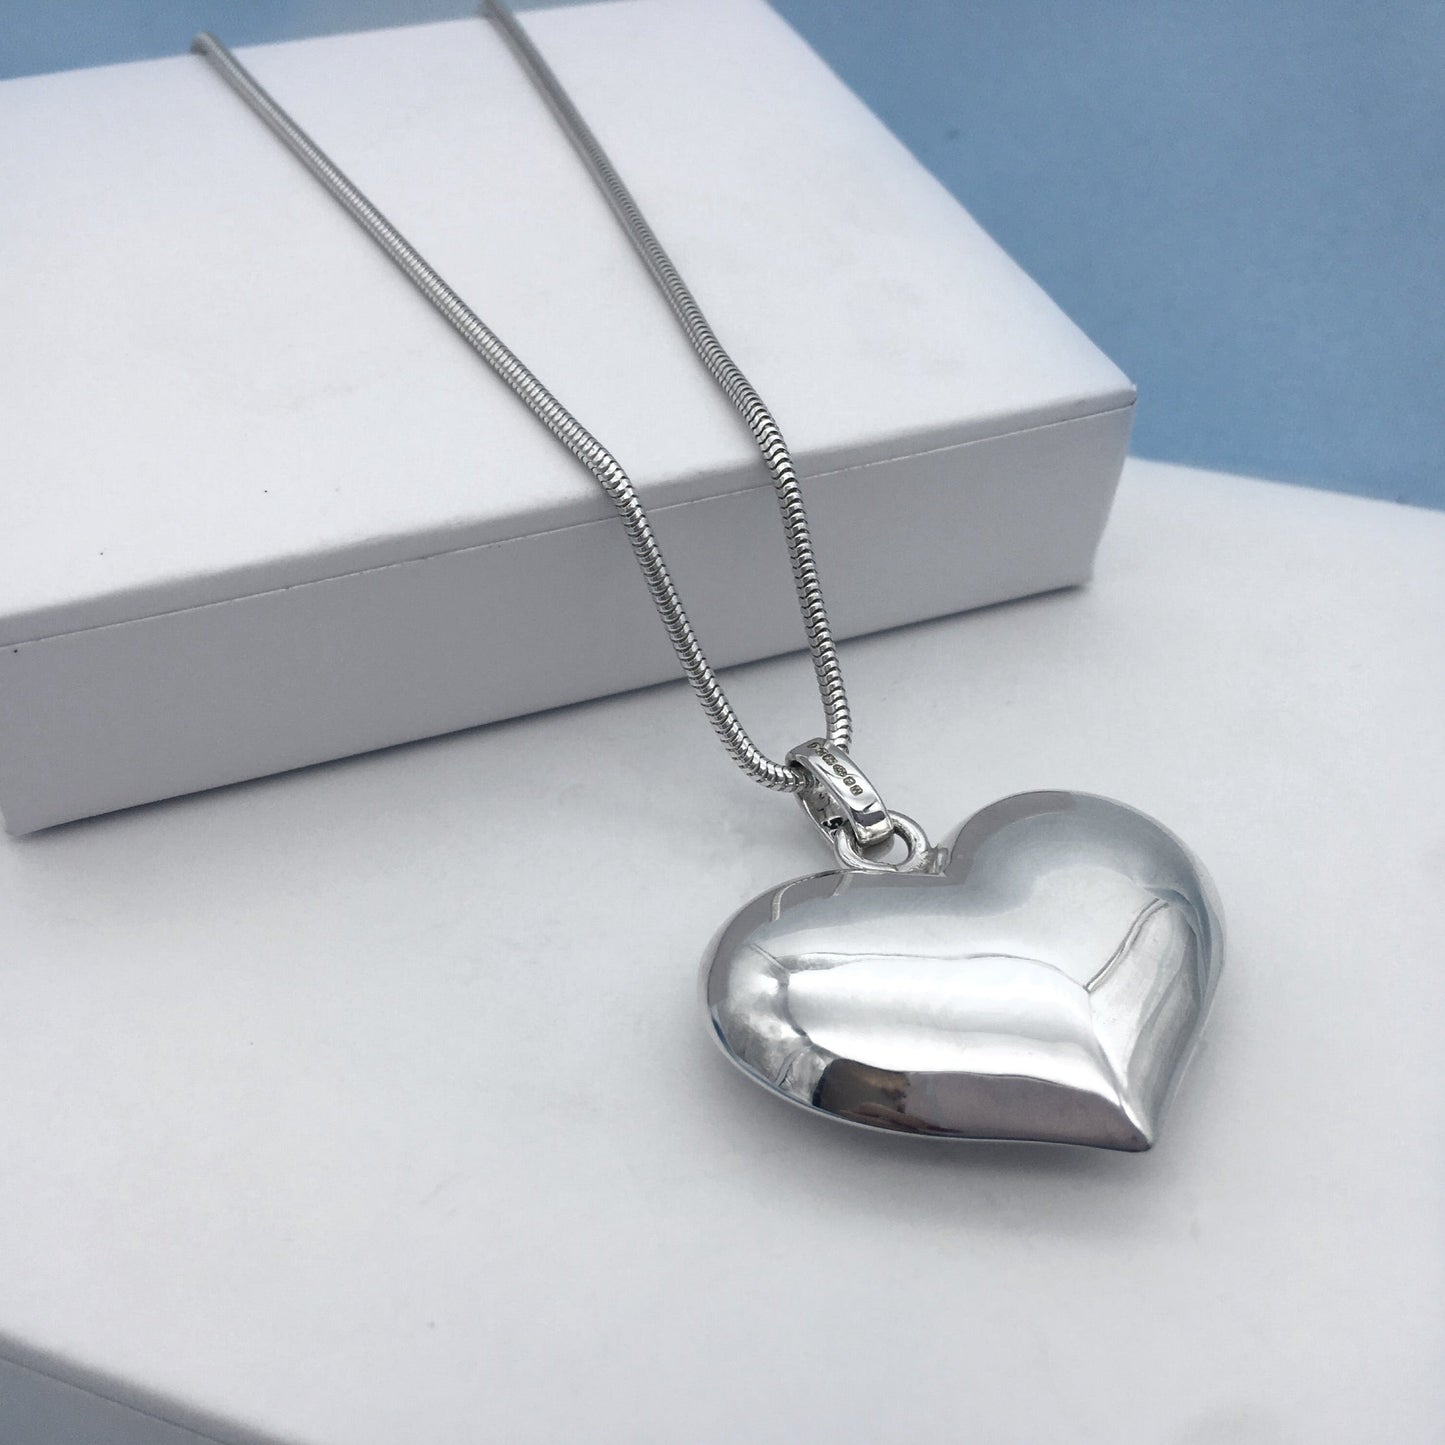 Love Heart Puffy Sterling Silver Pendant